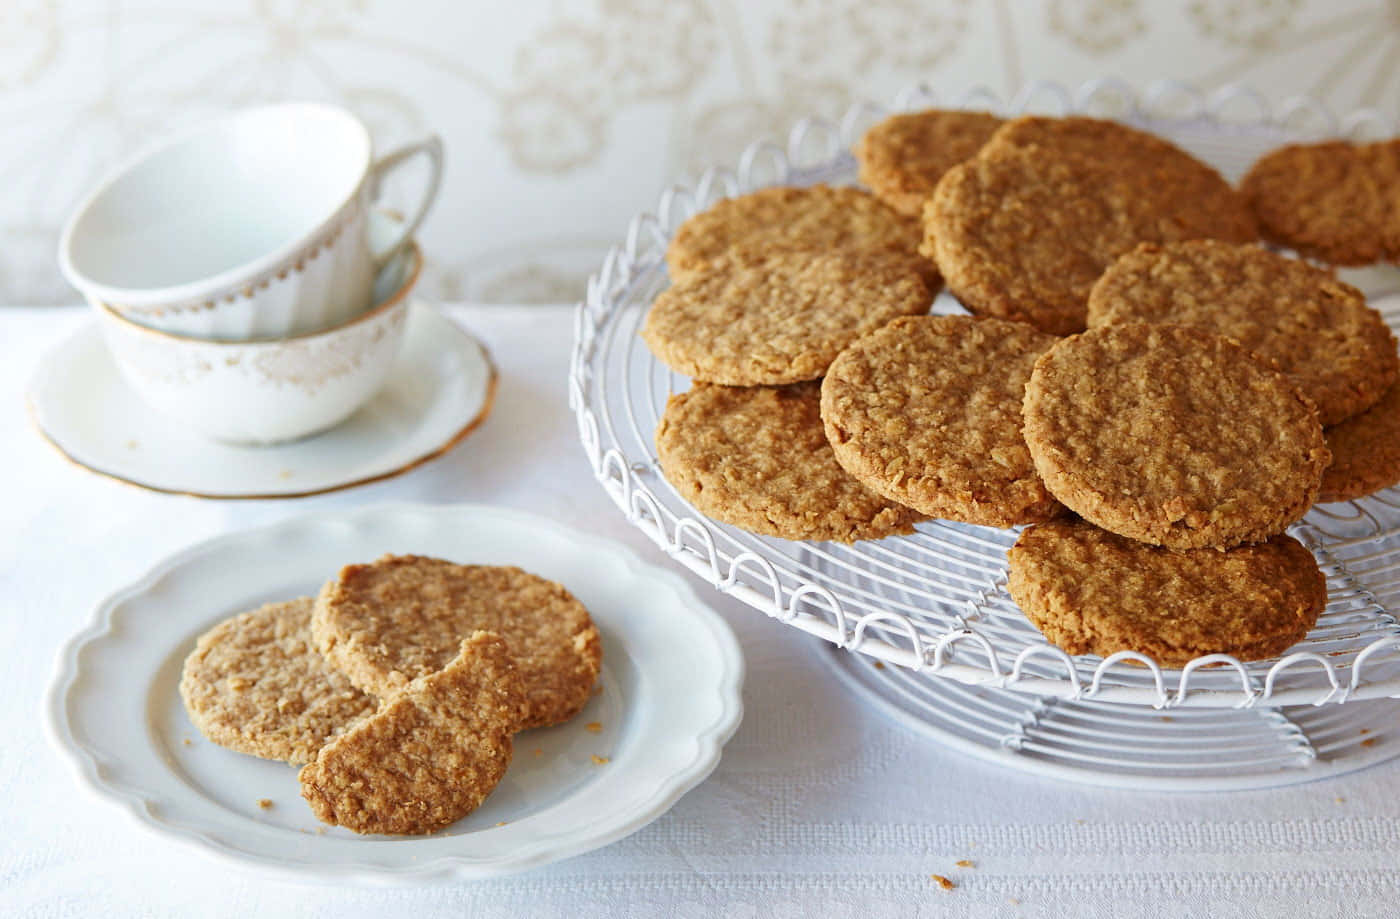 Delicious biscuits and a cup of coffee for an afternoon snack